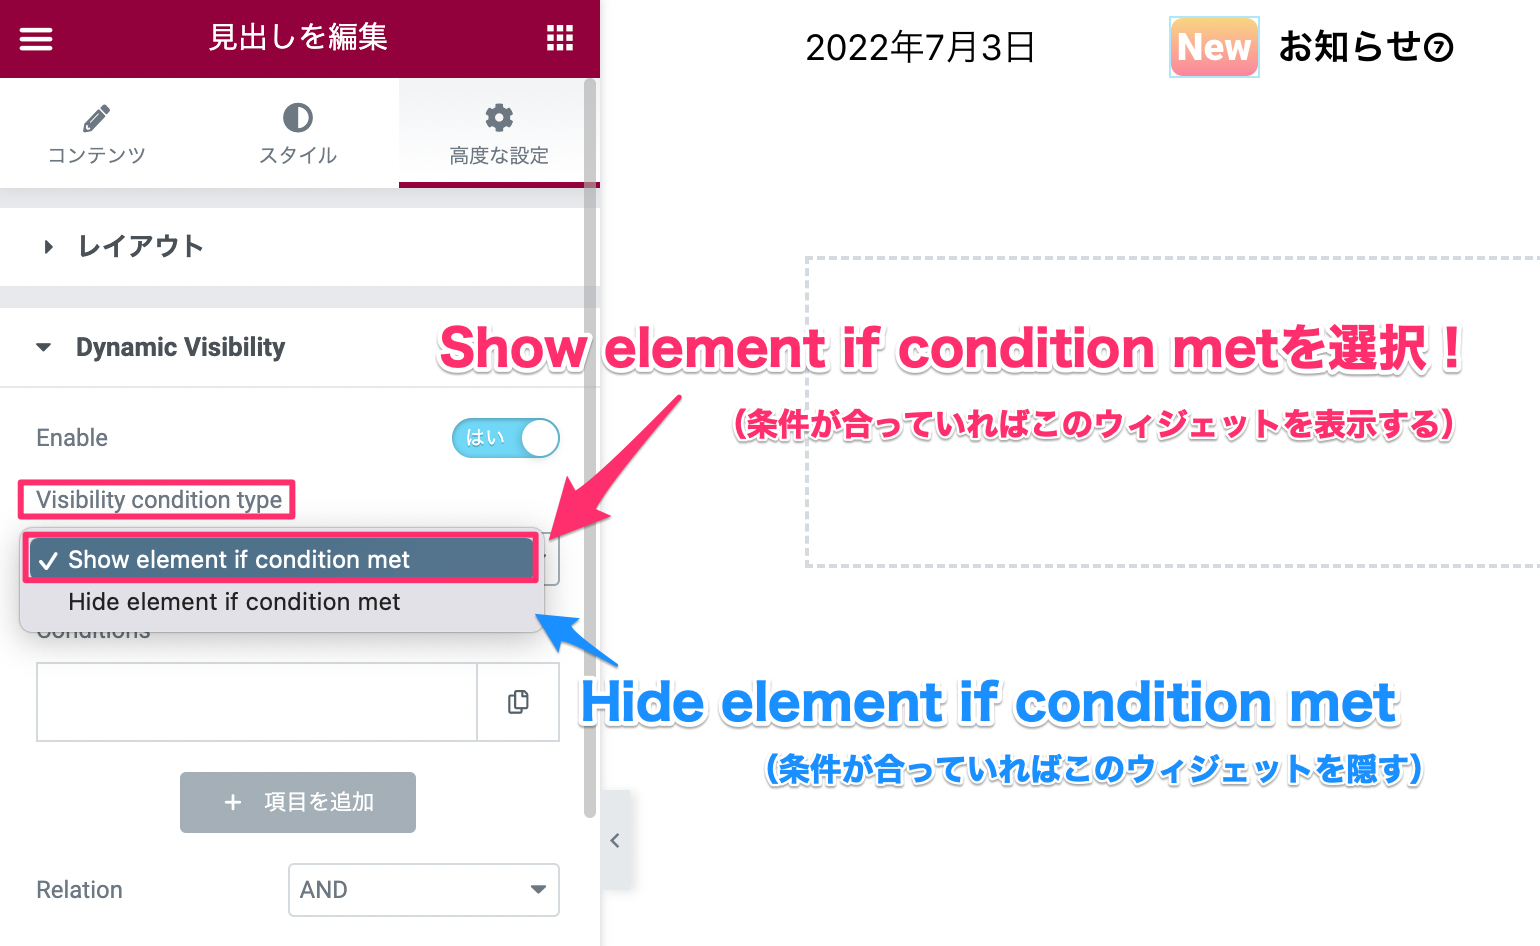 Visibility condition typeで『Show element if condition met』を選択